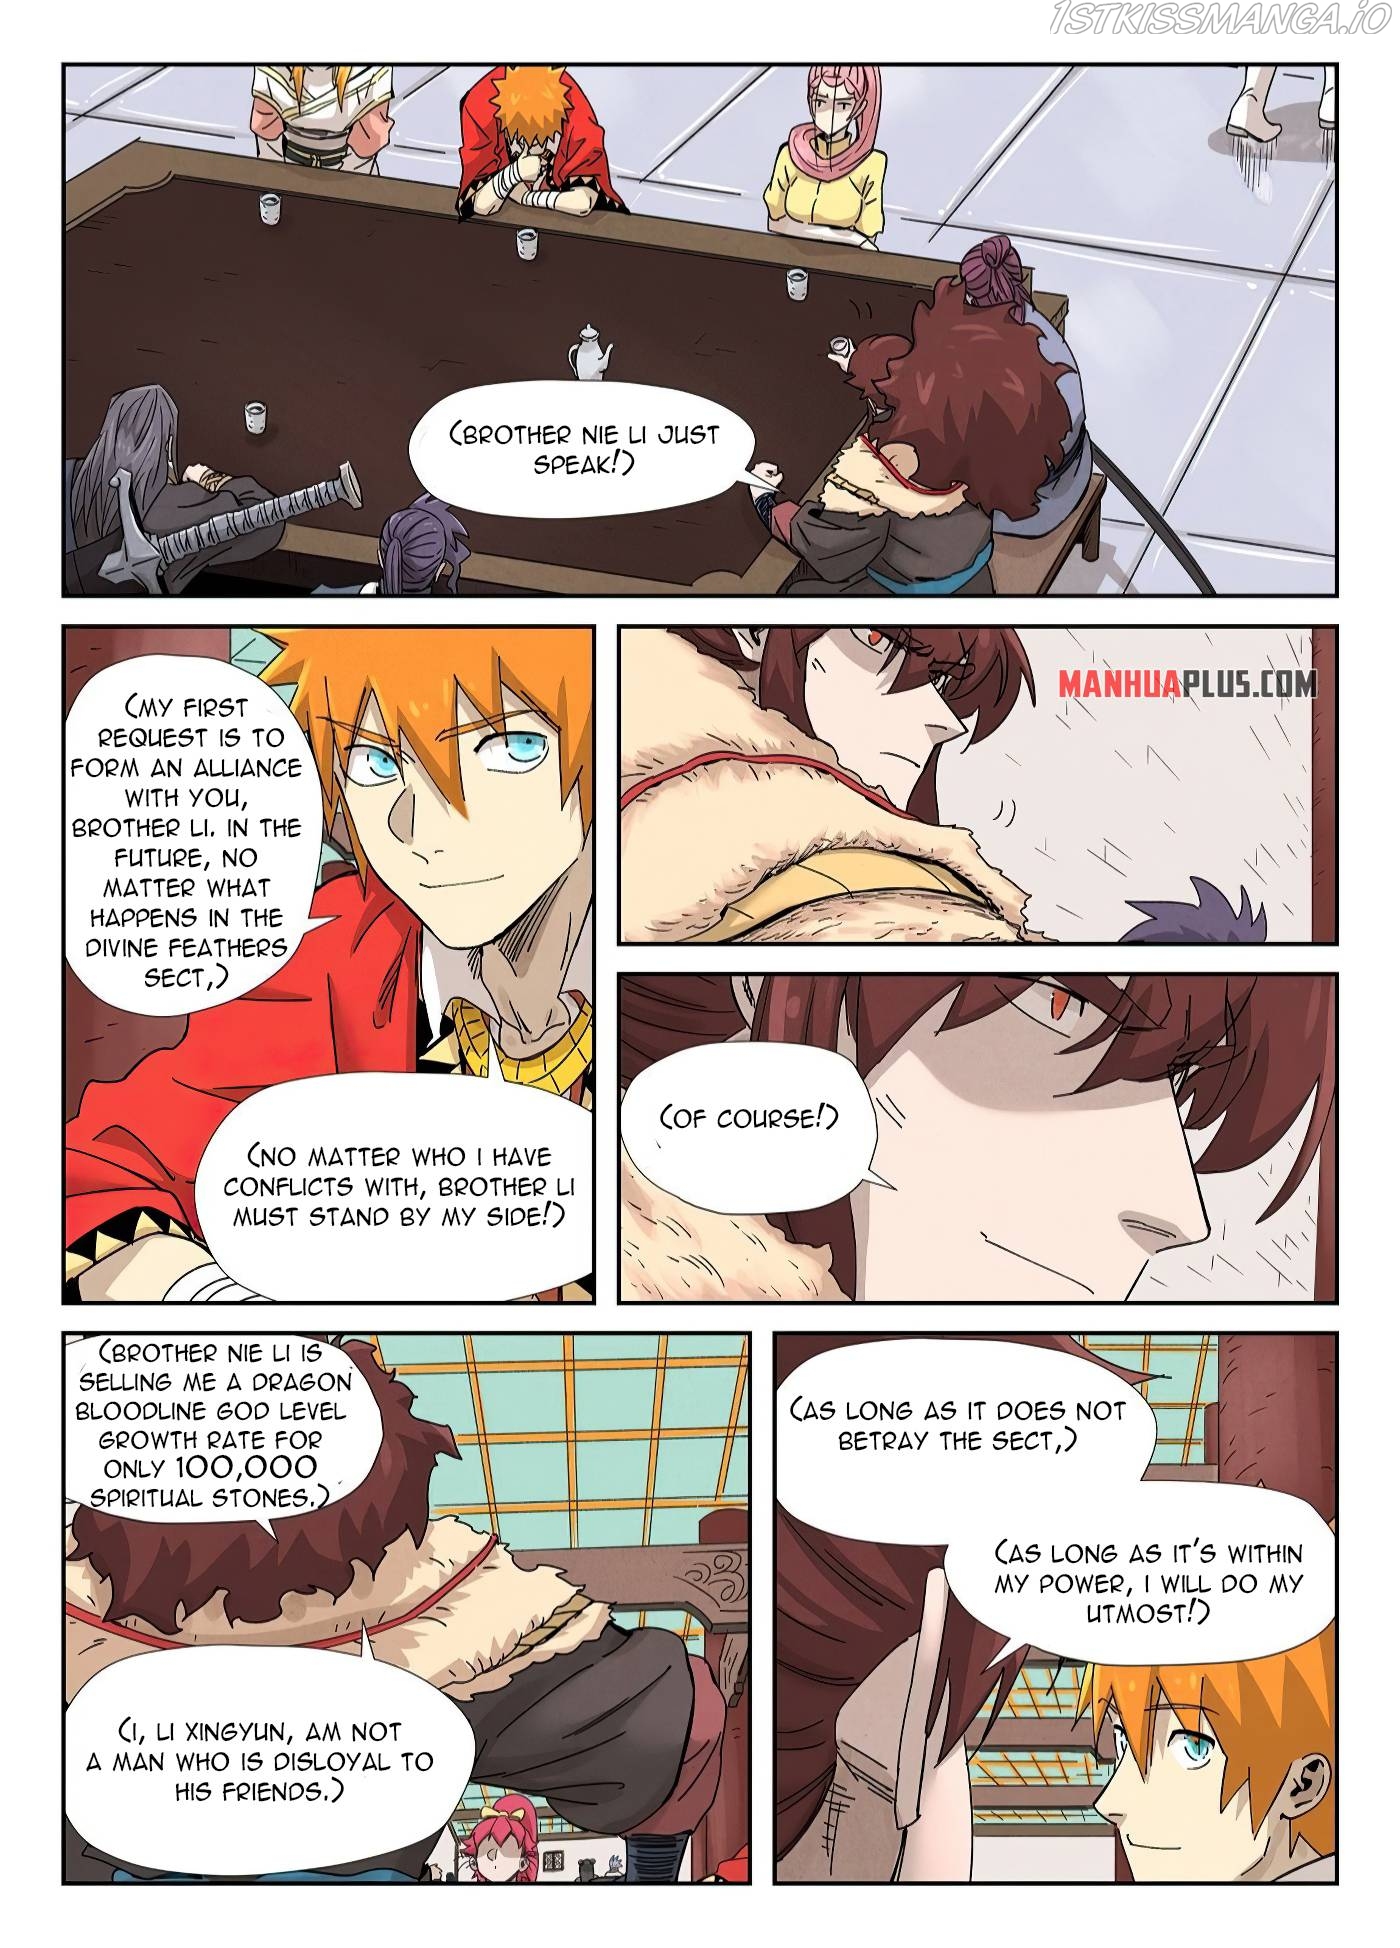 Tales of Demons and Gods Manhua Chapter 337.6 - Page 7